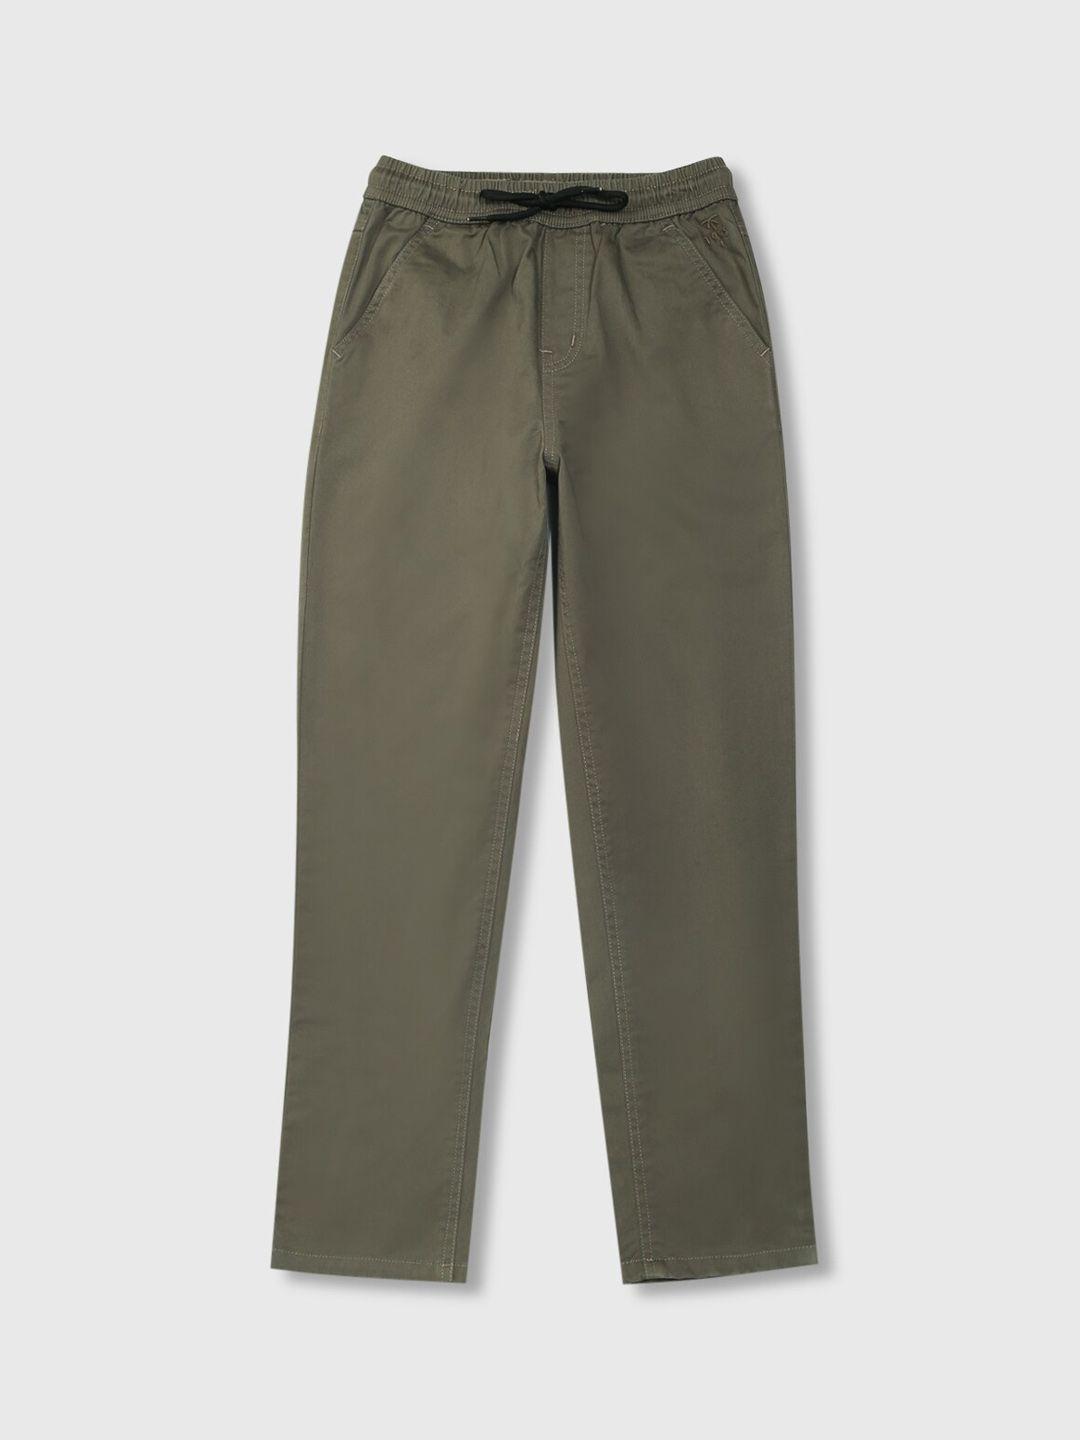 palm-tree-boys-olive-green-solid-joggers-trousers